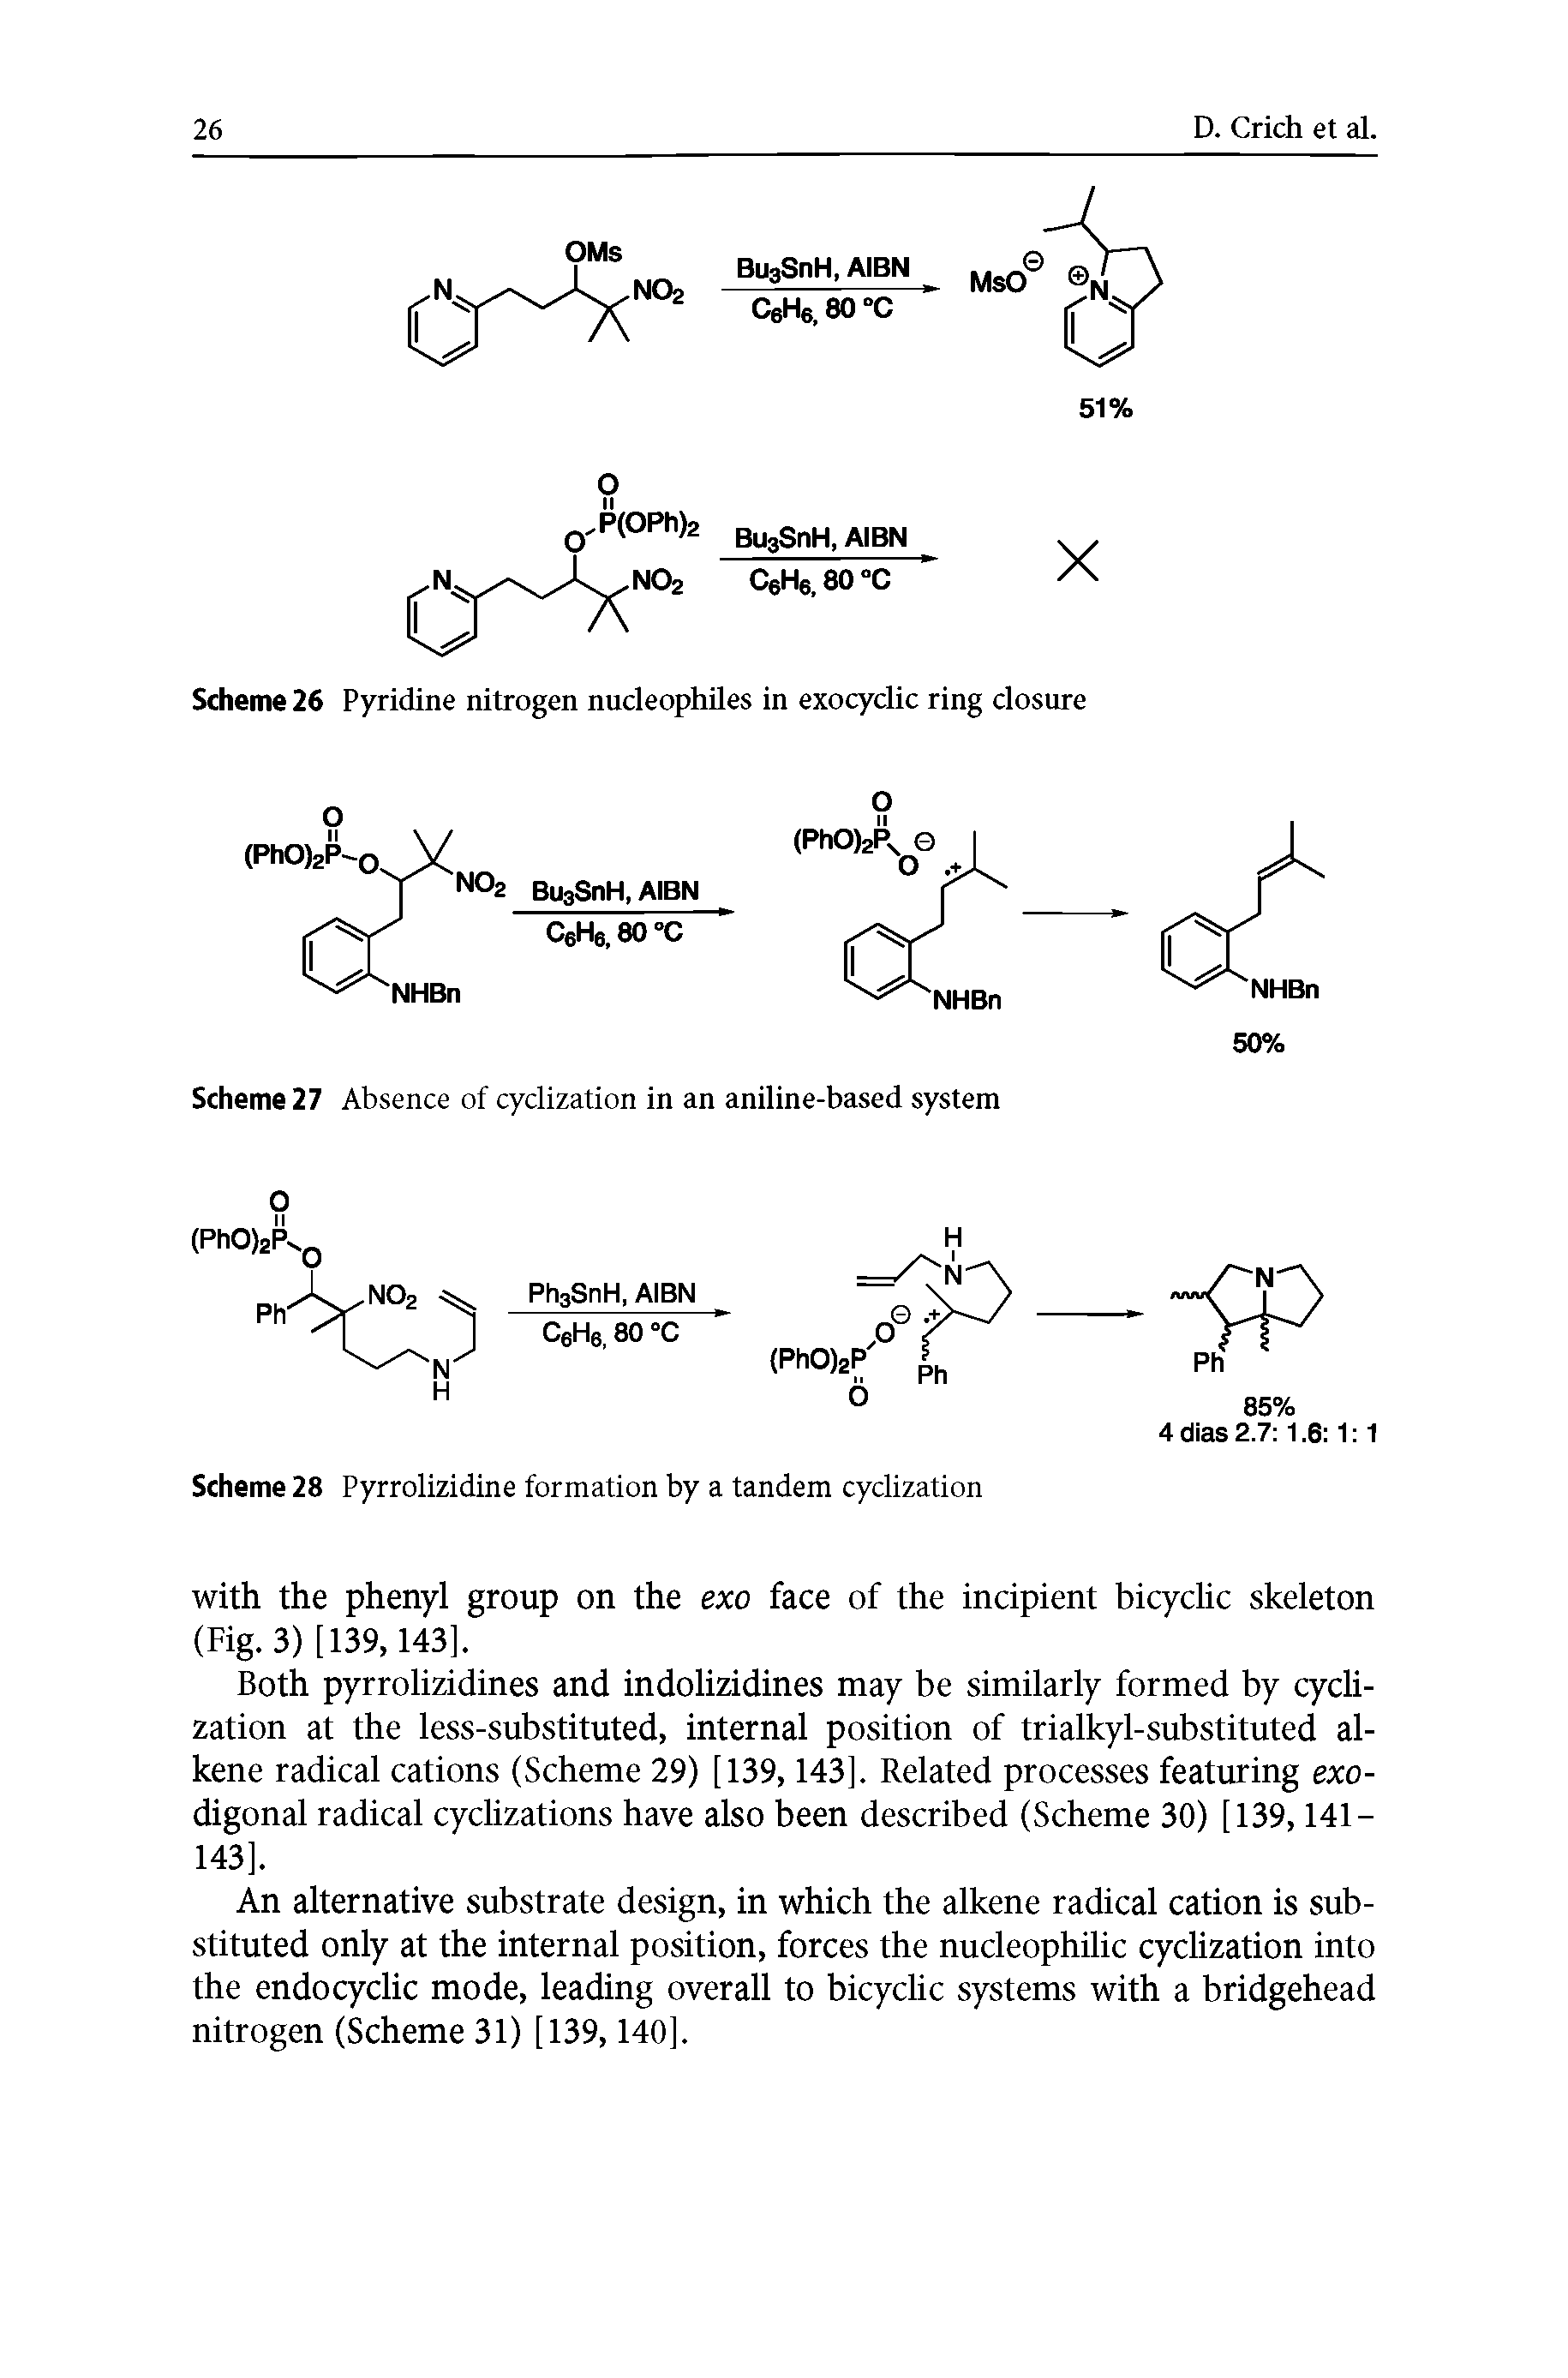 Scheme 27 Absence of cyclization in an aniline-based system...